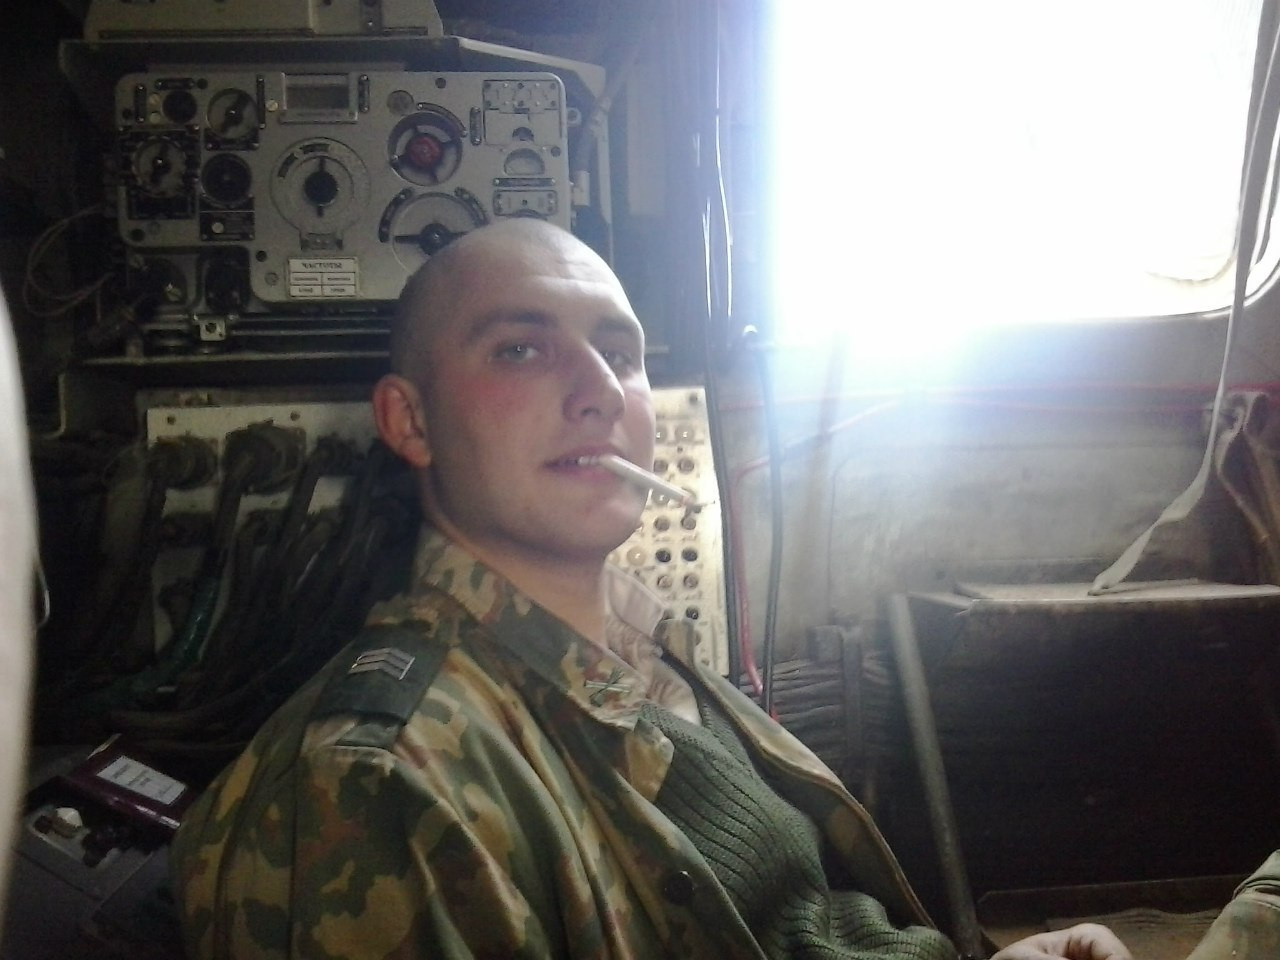 Krasnoproshin inside one of the unit's vehicles. The chevrons indicate that he is a sergeant. [Source]